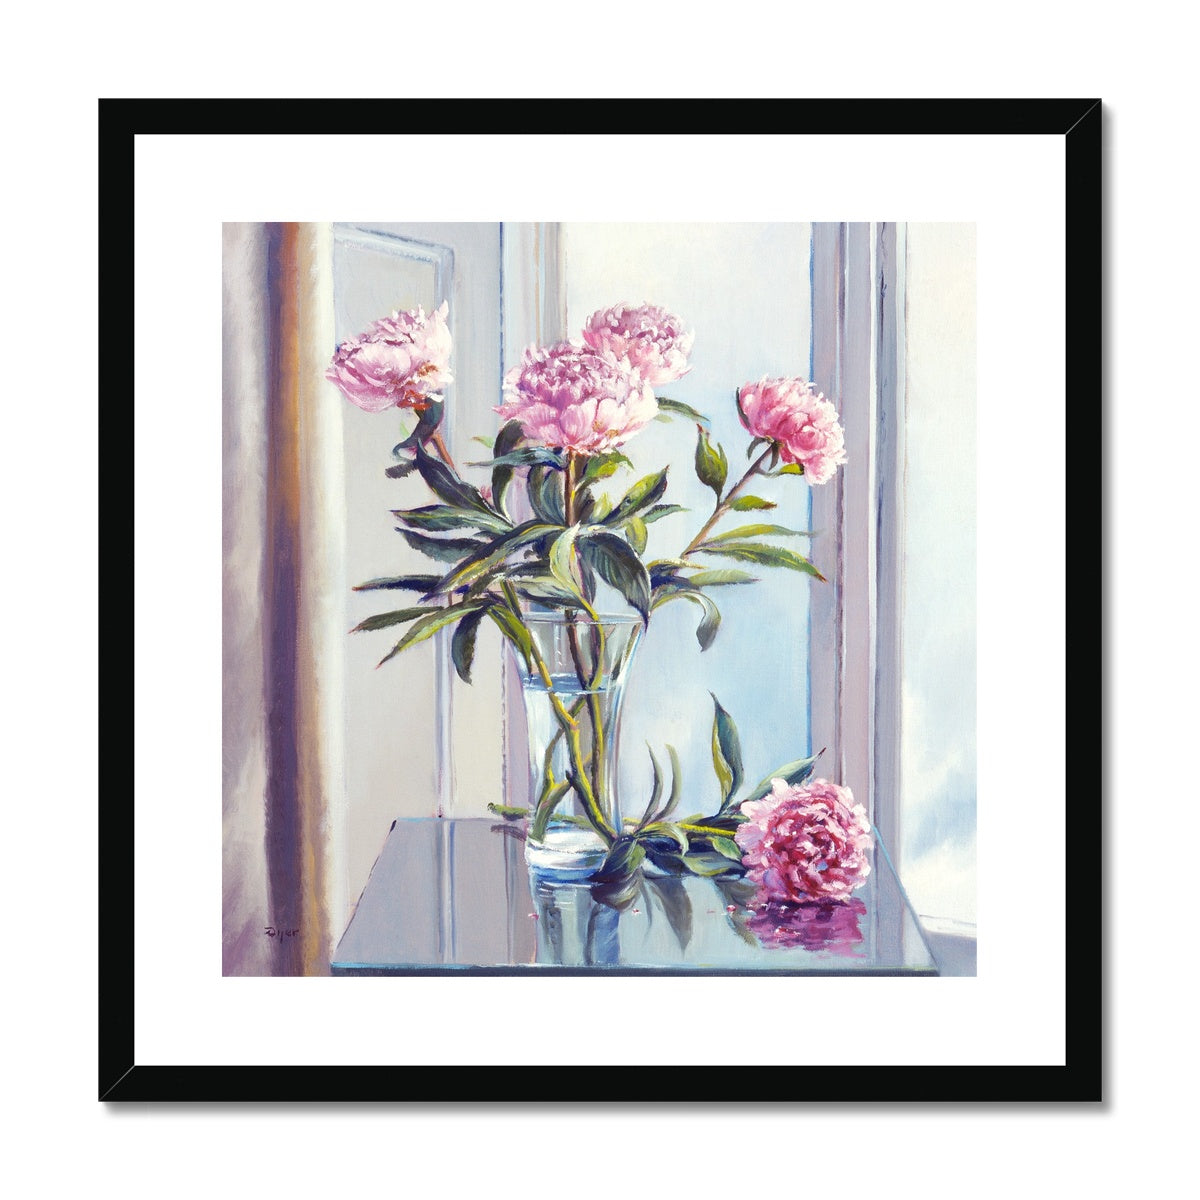 Ted Dyer Framed Open Edition Cornish Fine Art Print. 'Pink Peonies'. Cornwall Art Gallery